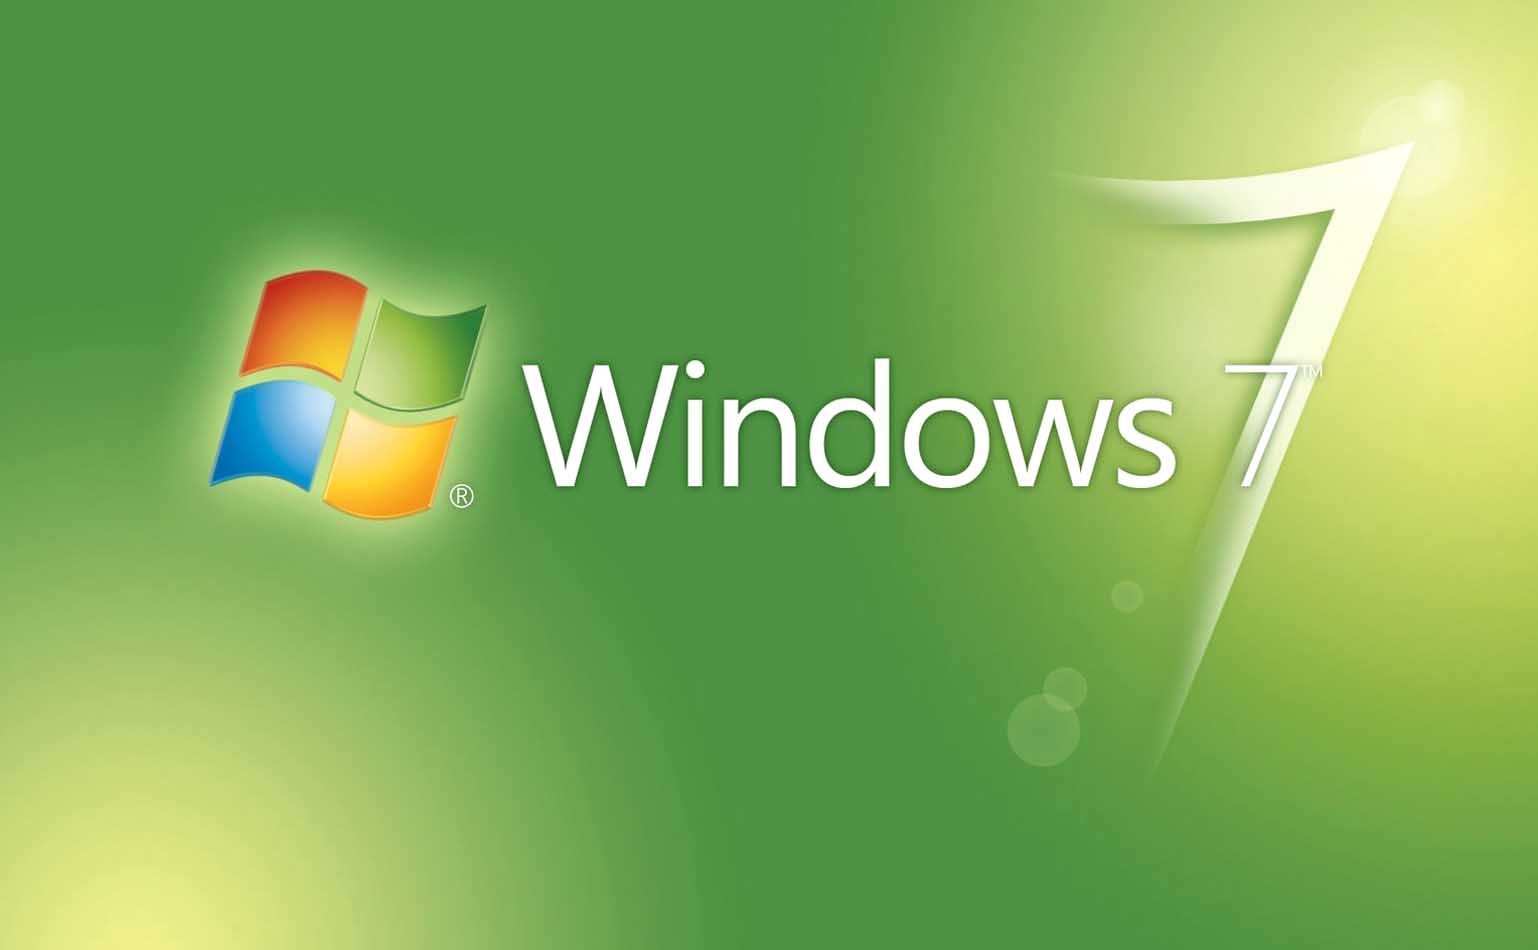 Windows 7 Ultimate Wallpapers Free Download Group (75+)